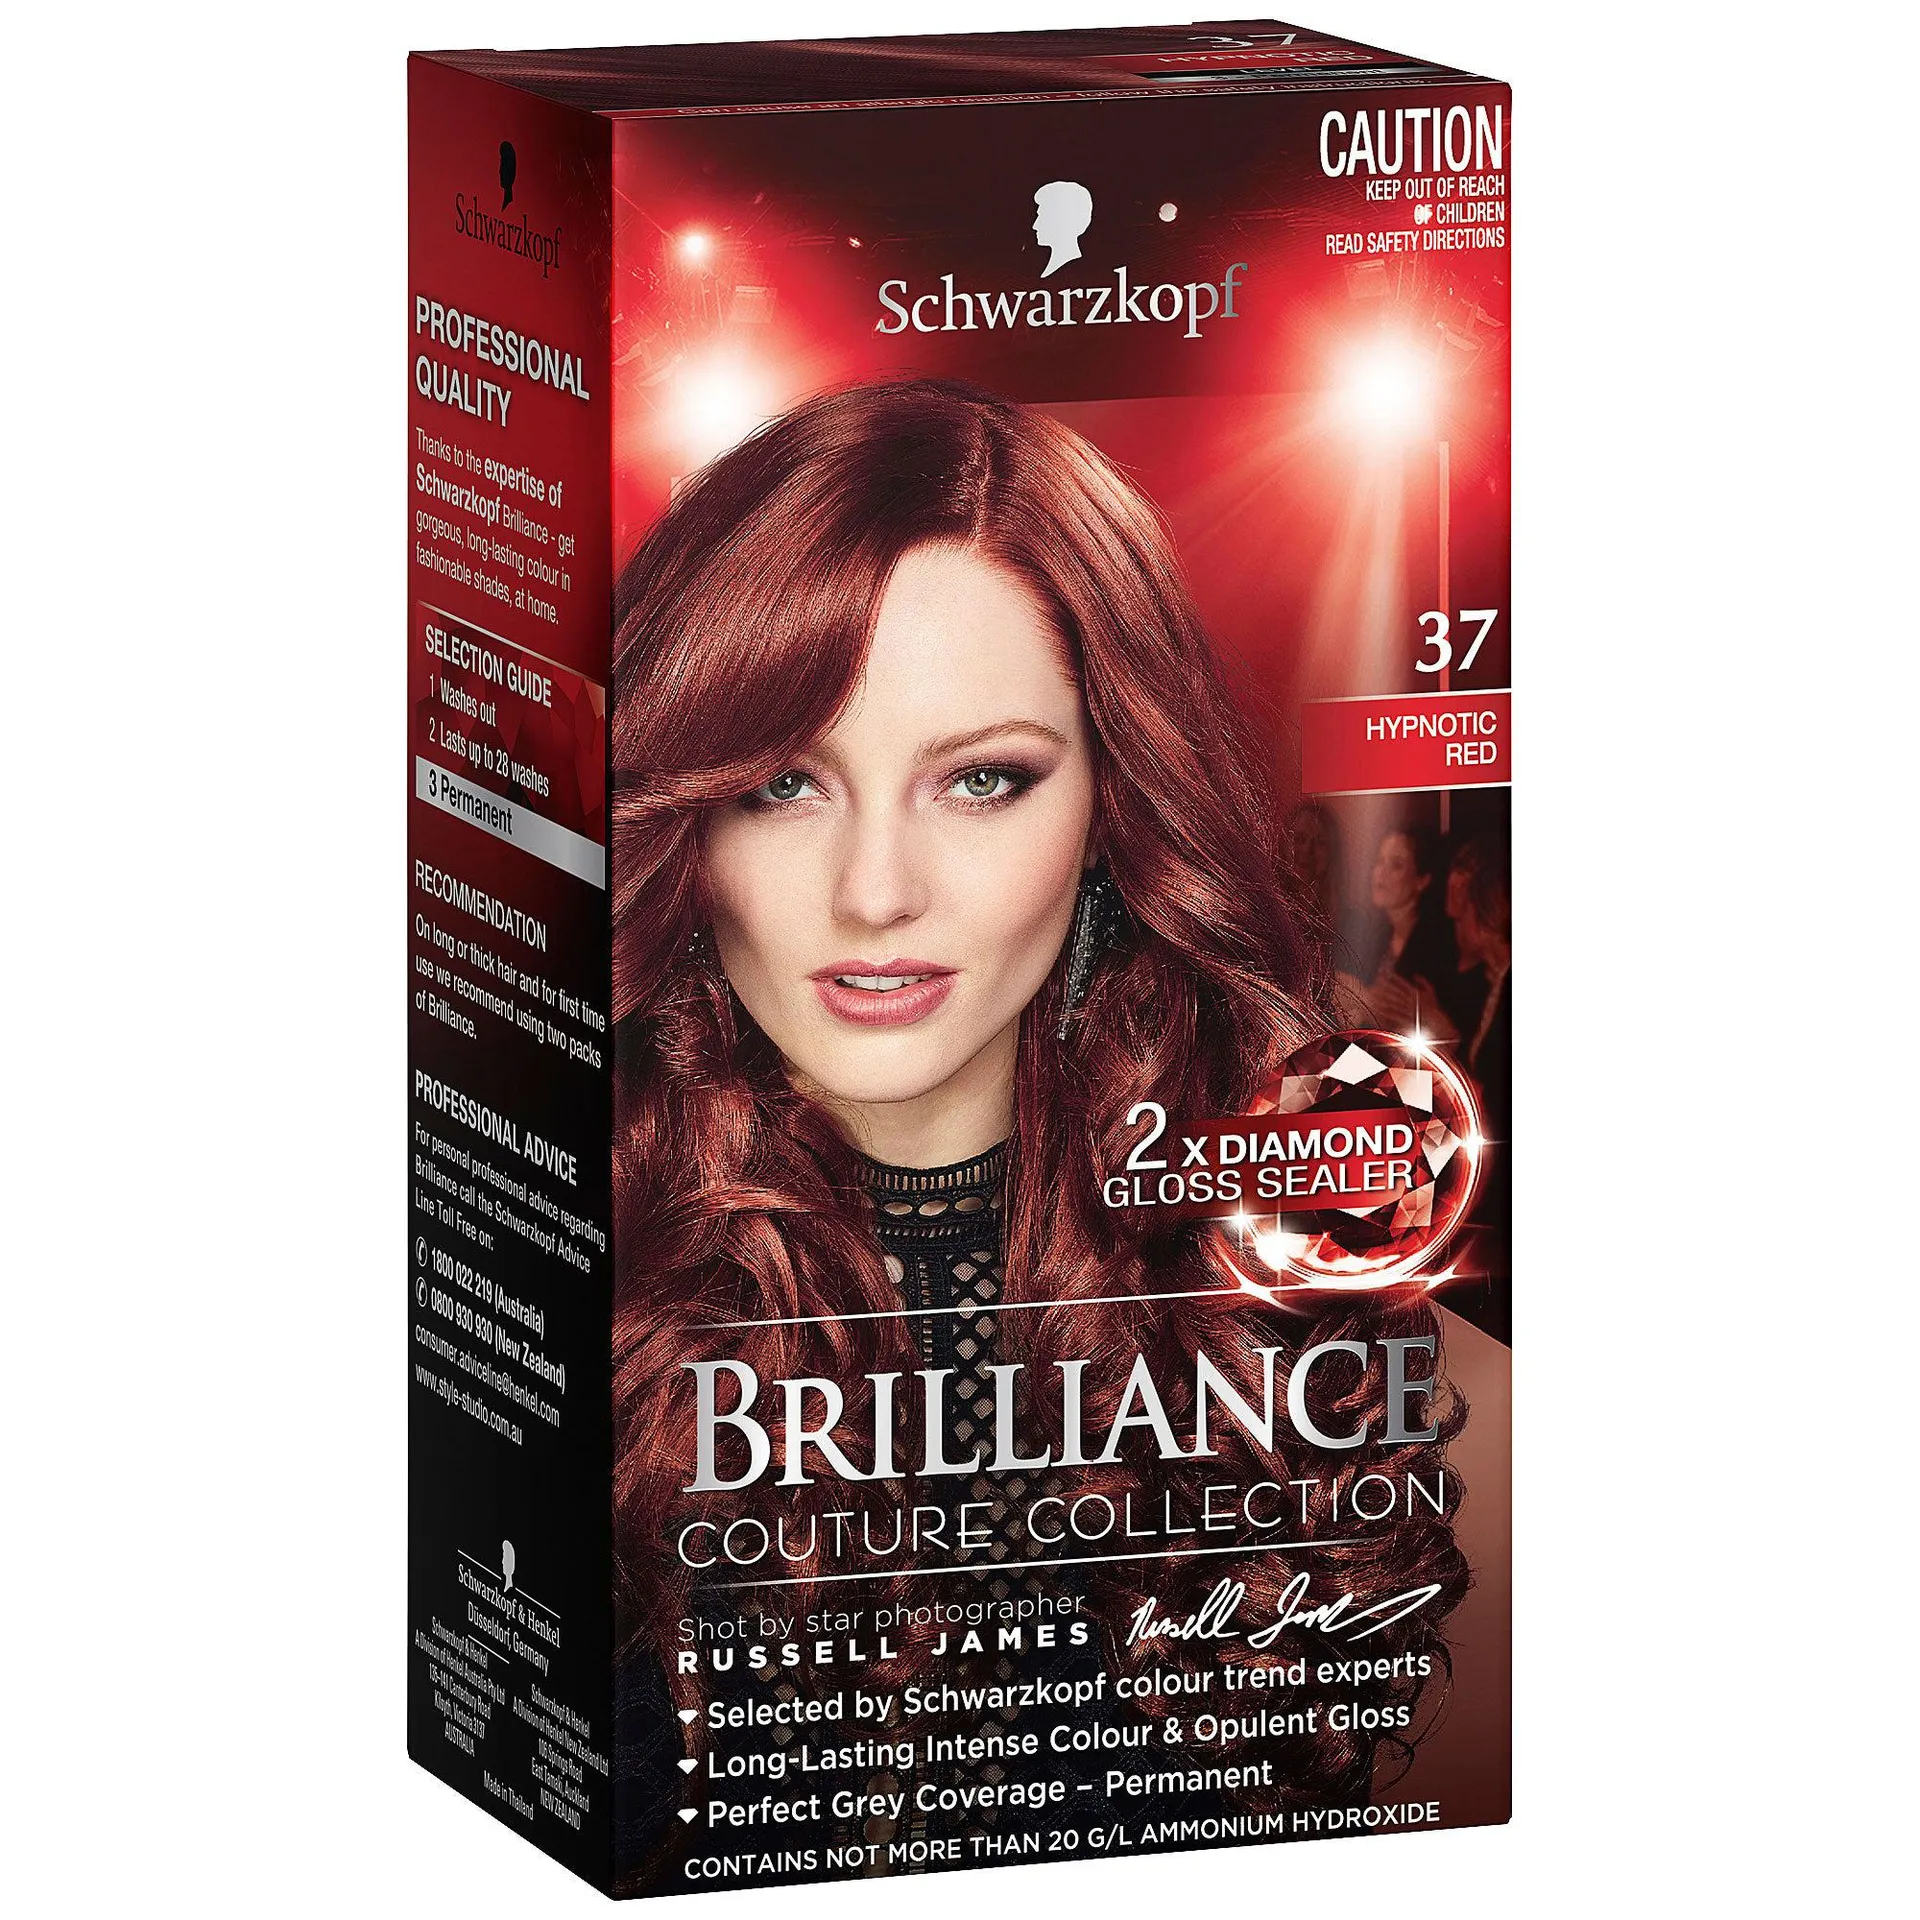 Schwarzkopf Brilliance Couture Collection 37 Hypnotic Red - Hair Colour